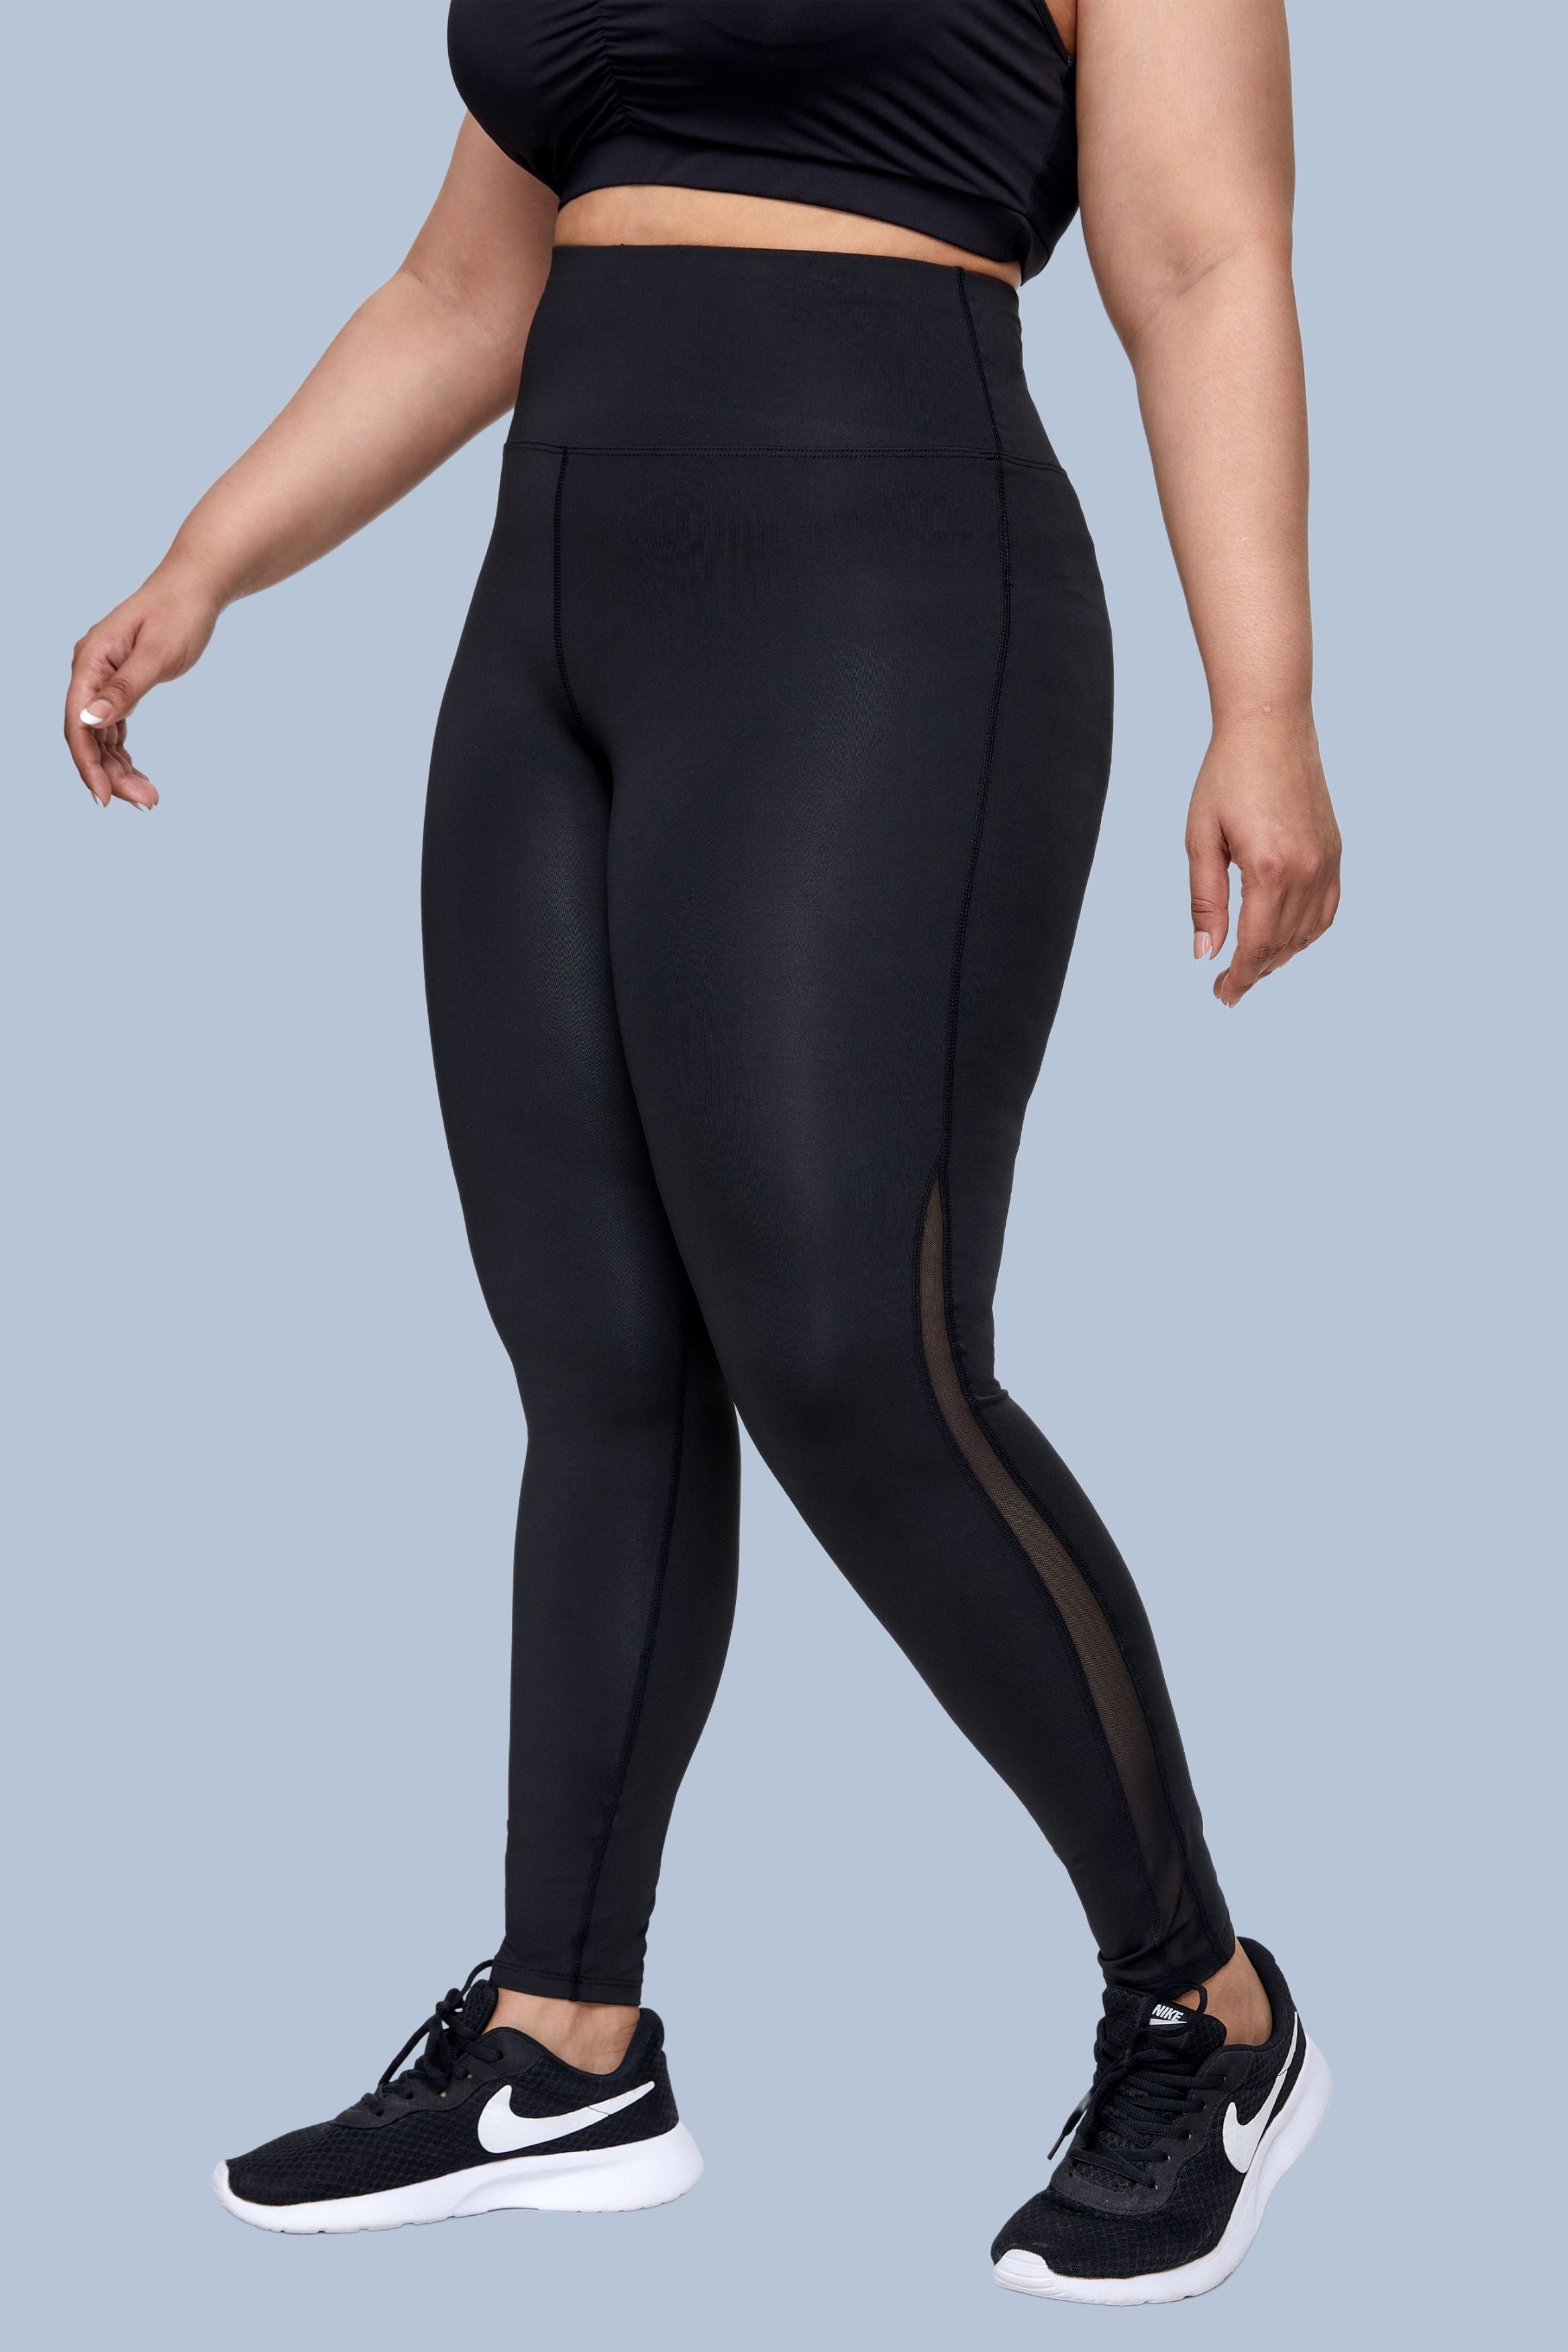 JD JEN-DAY Legging Stretch Plus Size high Waist Yoga Pants Very Elastic  Non-See-Through with 2 Pockets to Place Your Phone., Black, X-Large :  : Clothing, Shoes & Accessories